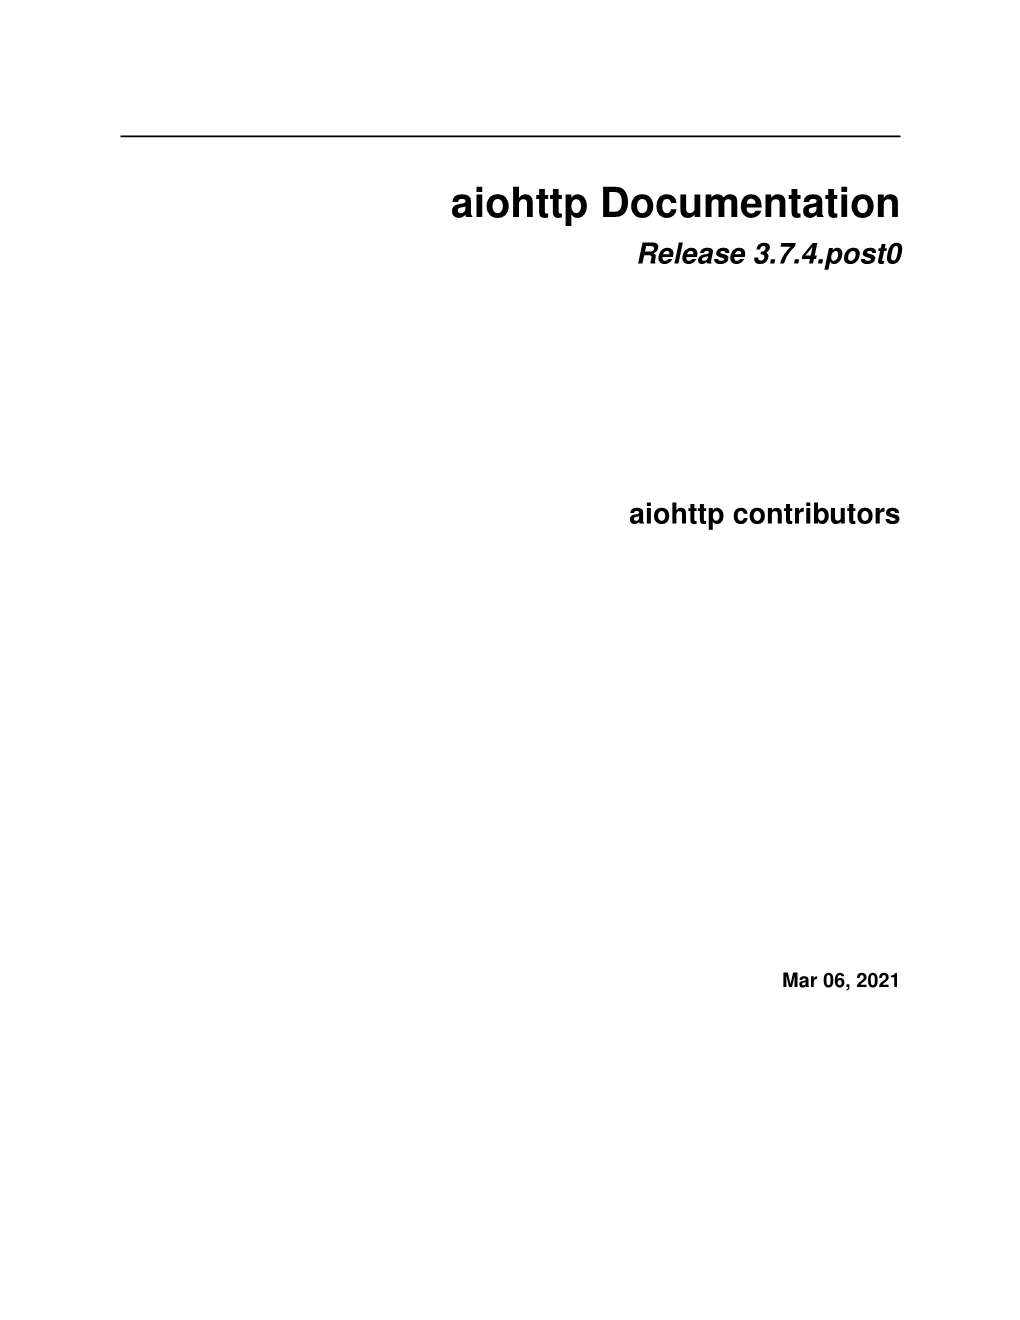 Aiohttp Documentation Release 3.7.4.Post0